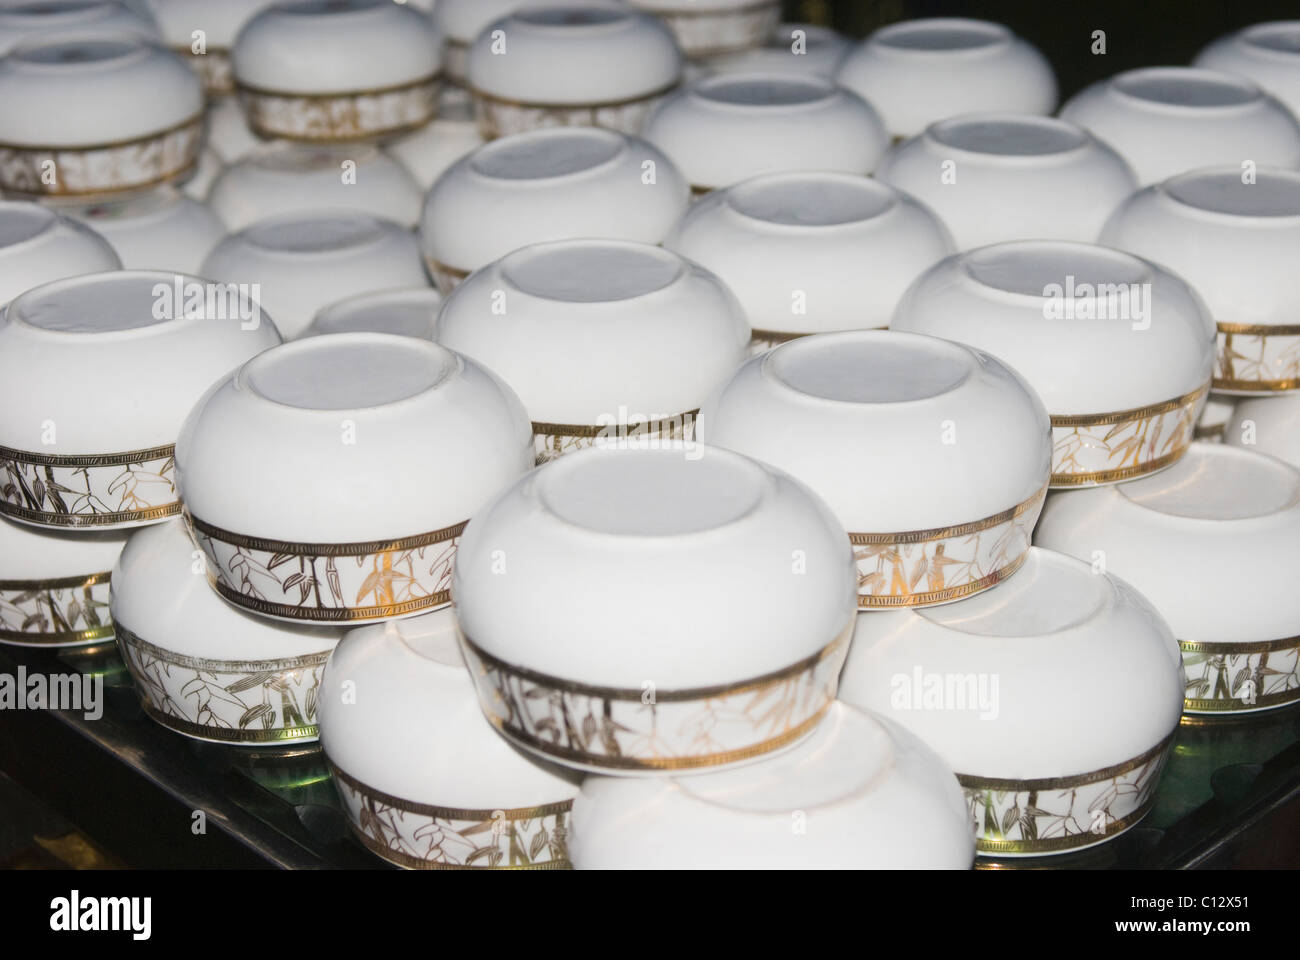 Soup bowls arranged on a table in a wedding Stock Photo